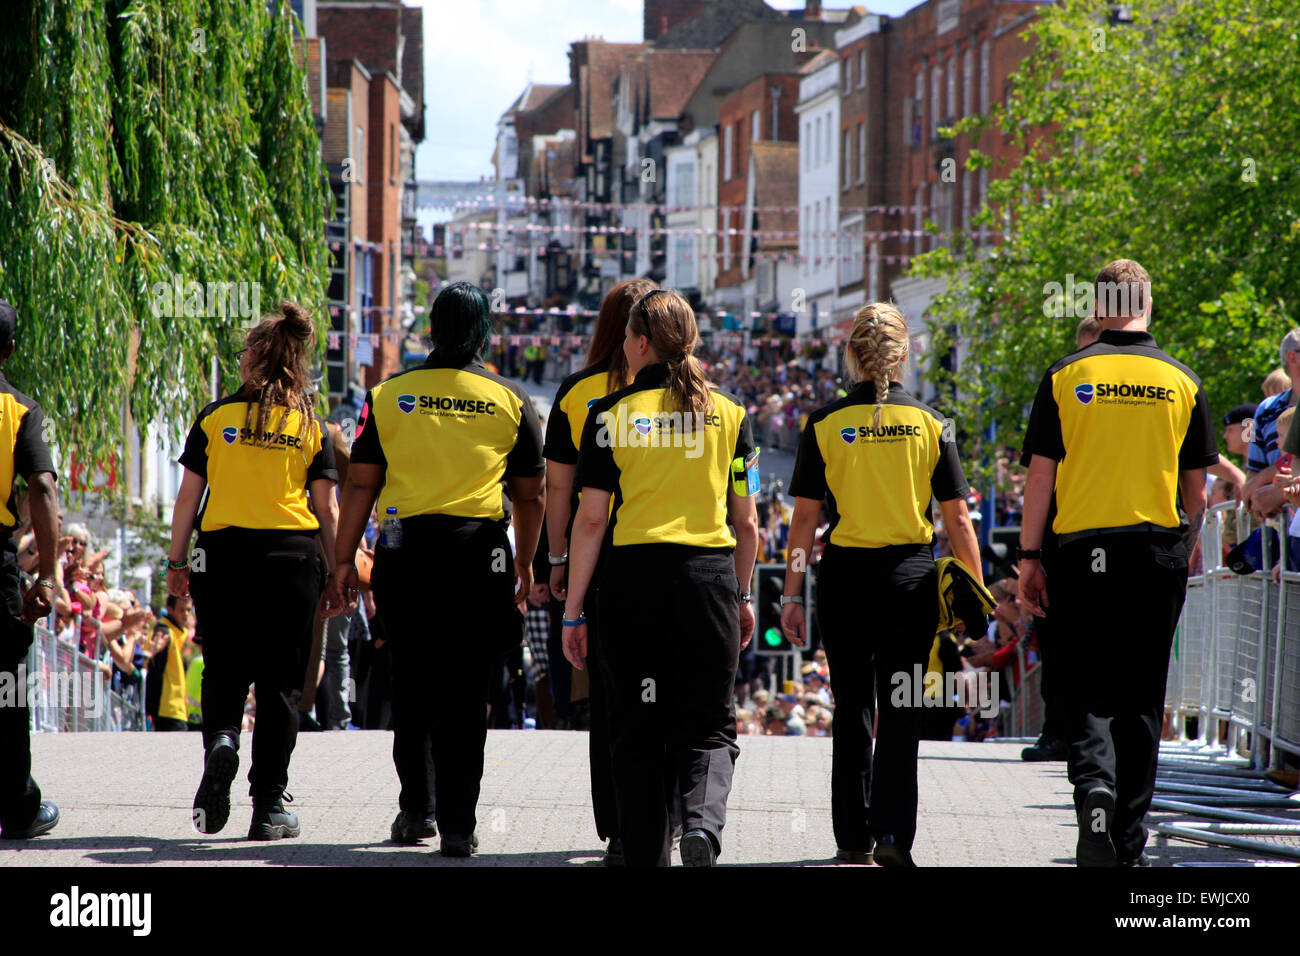 Guildford, Surrey, UK. 27th June, 2015.   Armed Forces Day parade in Guildford High Street. Showsec crowd management employees help organise crowds as Guildford High Street is closed off to allow local people and the wider communuty to watch the parade and thank everyone in the Armed Forces Credit:  Bruce McGowan/Alamy Live News Stock Photo